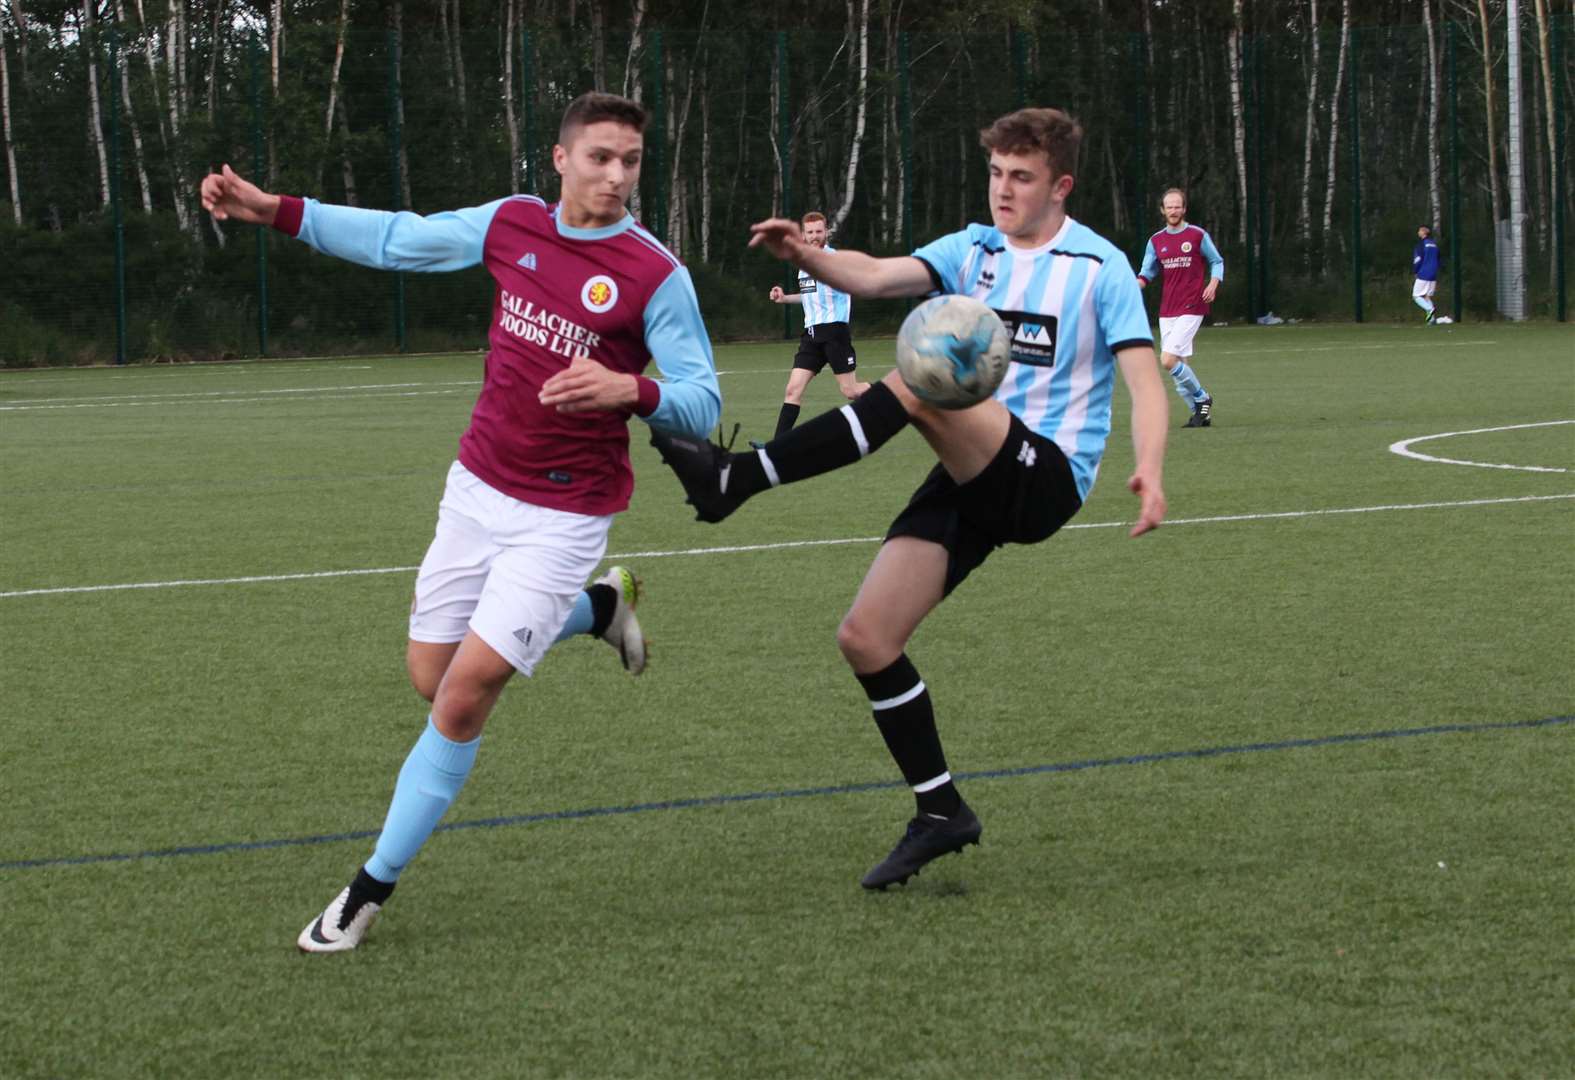 Action from the final weeks of the 2019 season in the Strathspey & Badenoch Welfare football league.